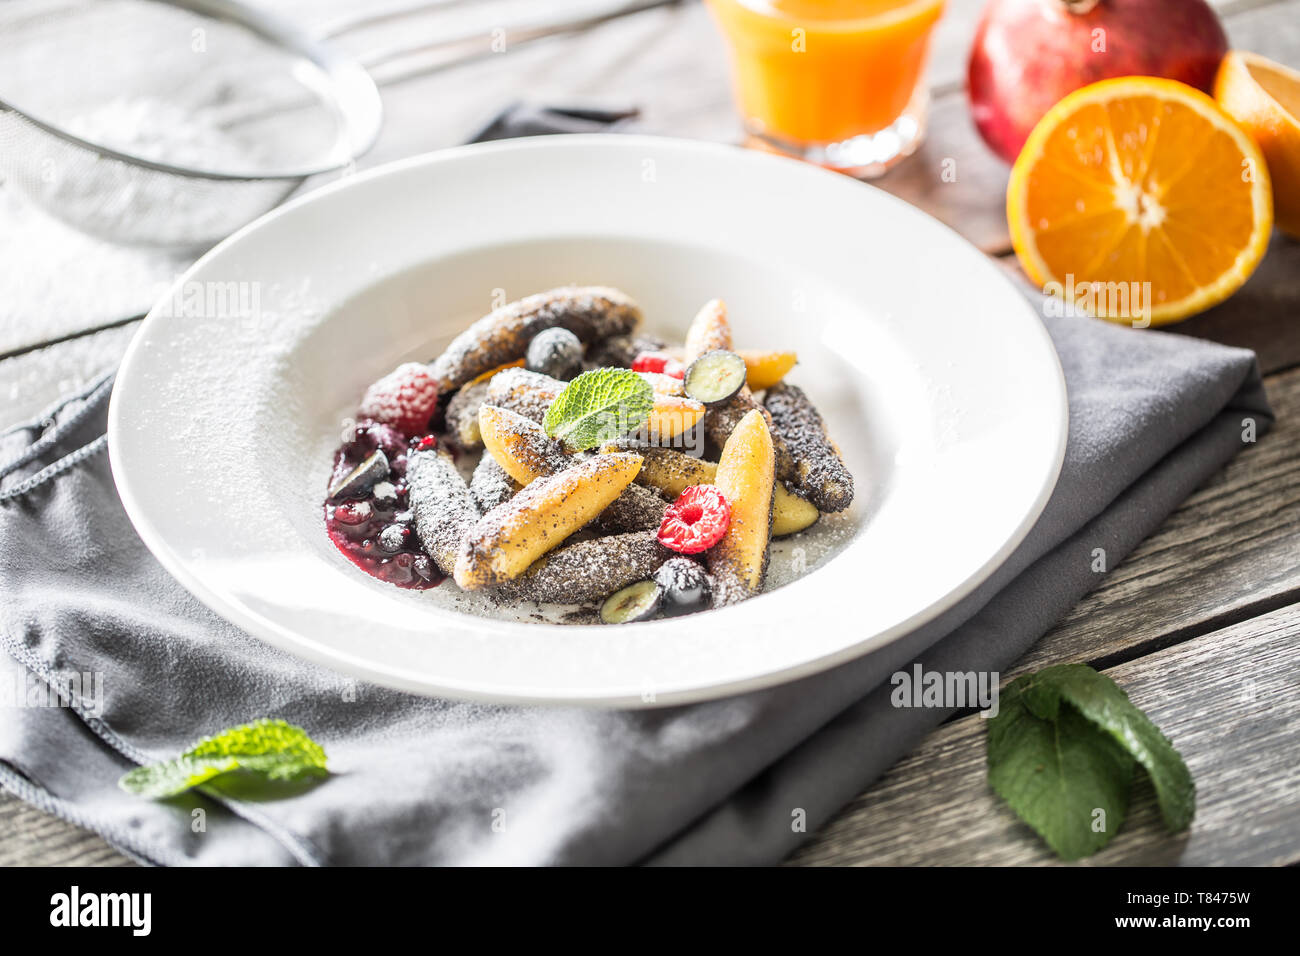 Potato dumplings sulance gnocci with milled poppy seeds shugar powder and marmalade. Traditional slovak czech and austrian sweet food Stock Photo